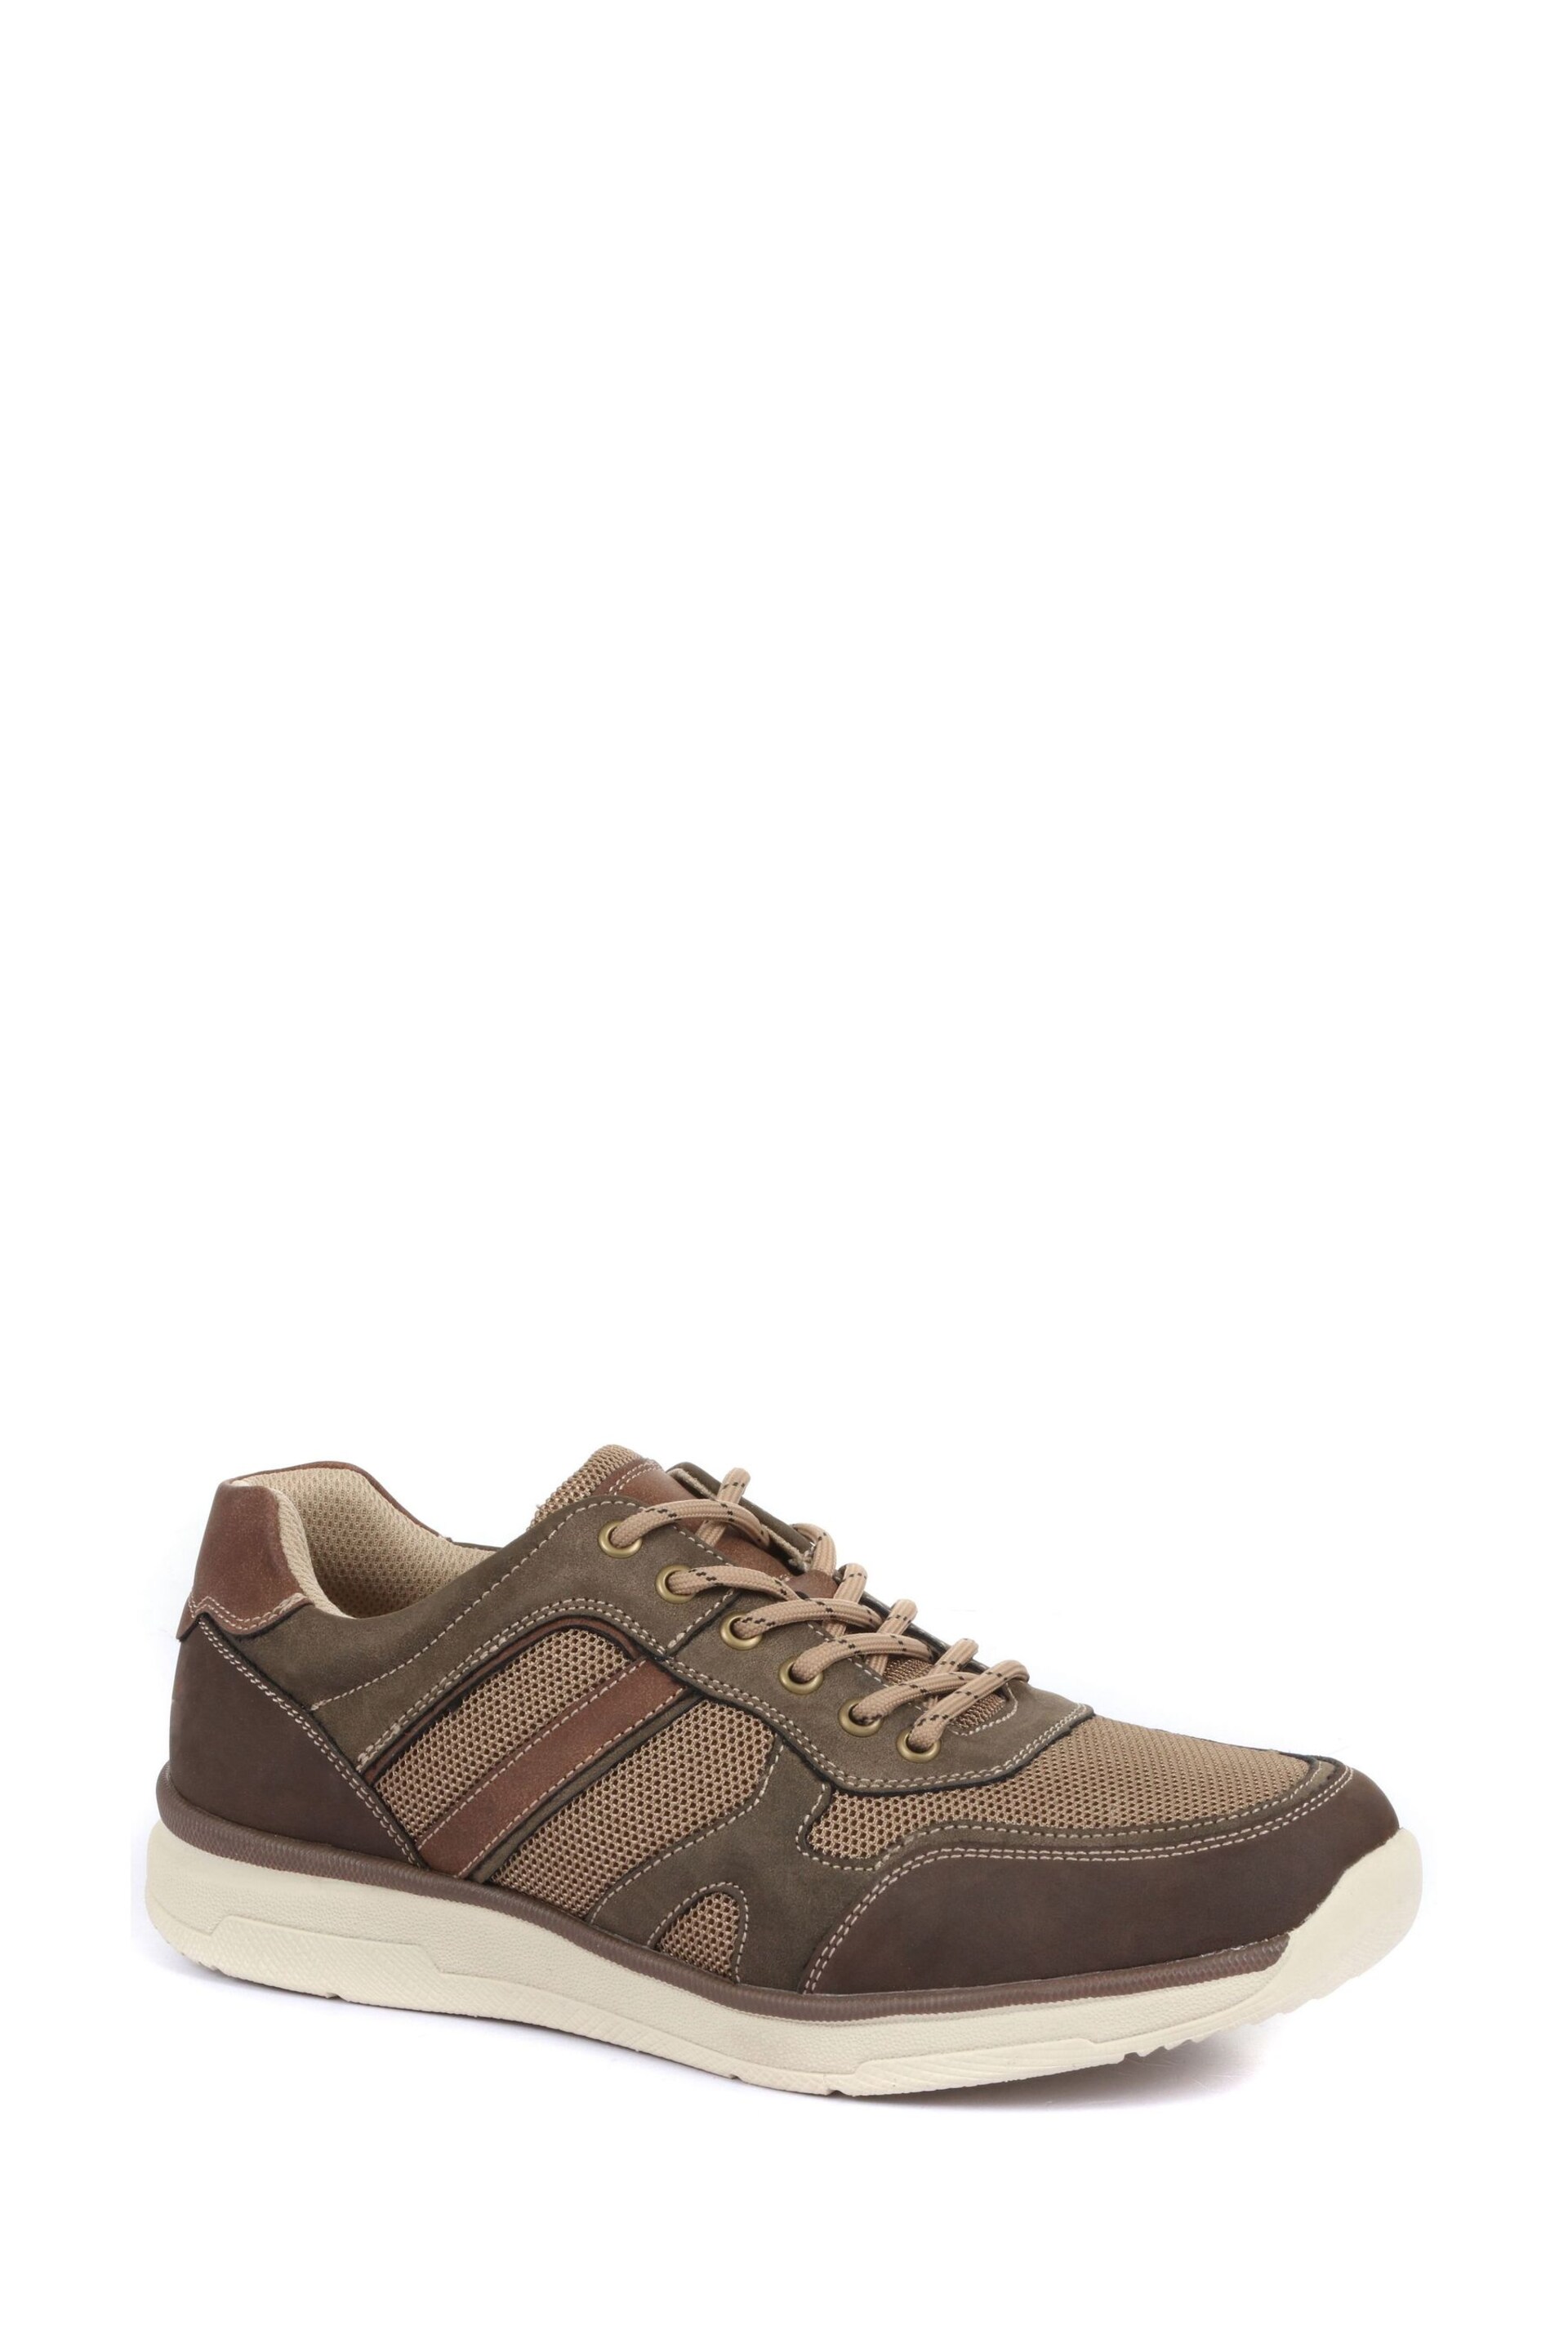 Pavers Brown Mens Wide Fit Trainers - Image 2 of 5